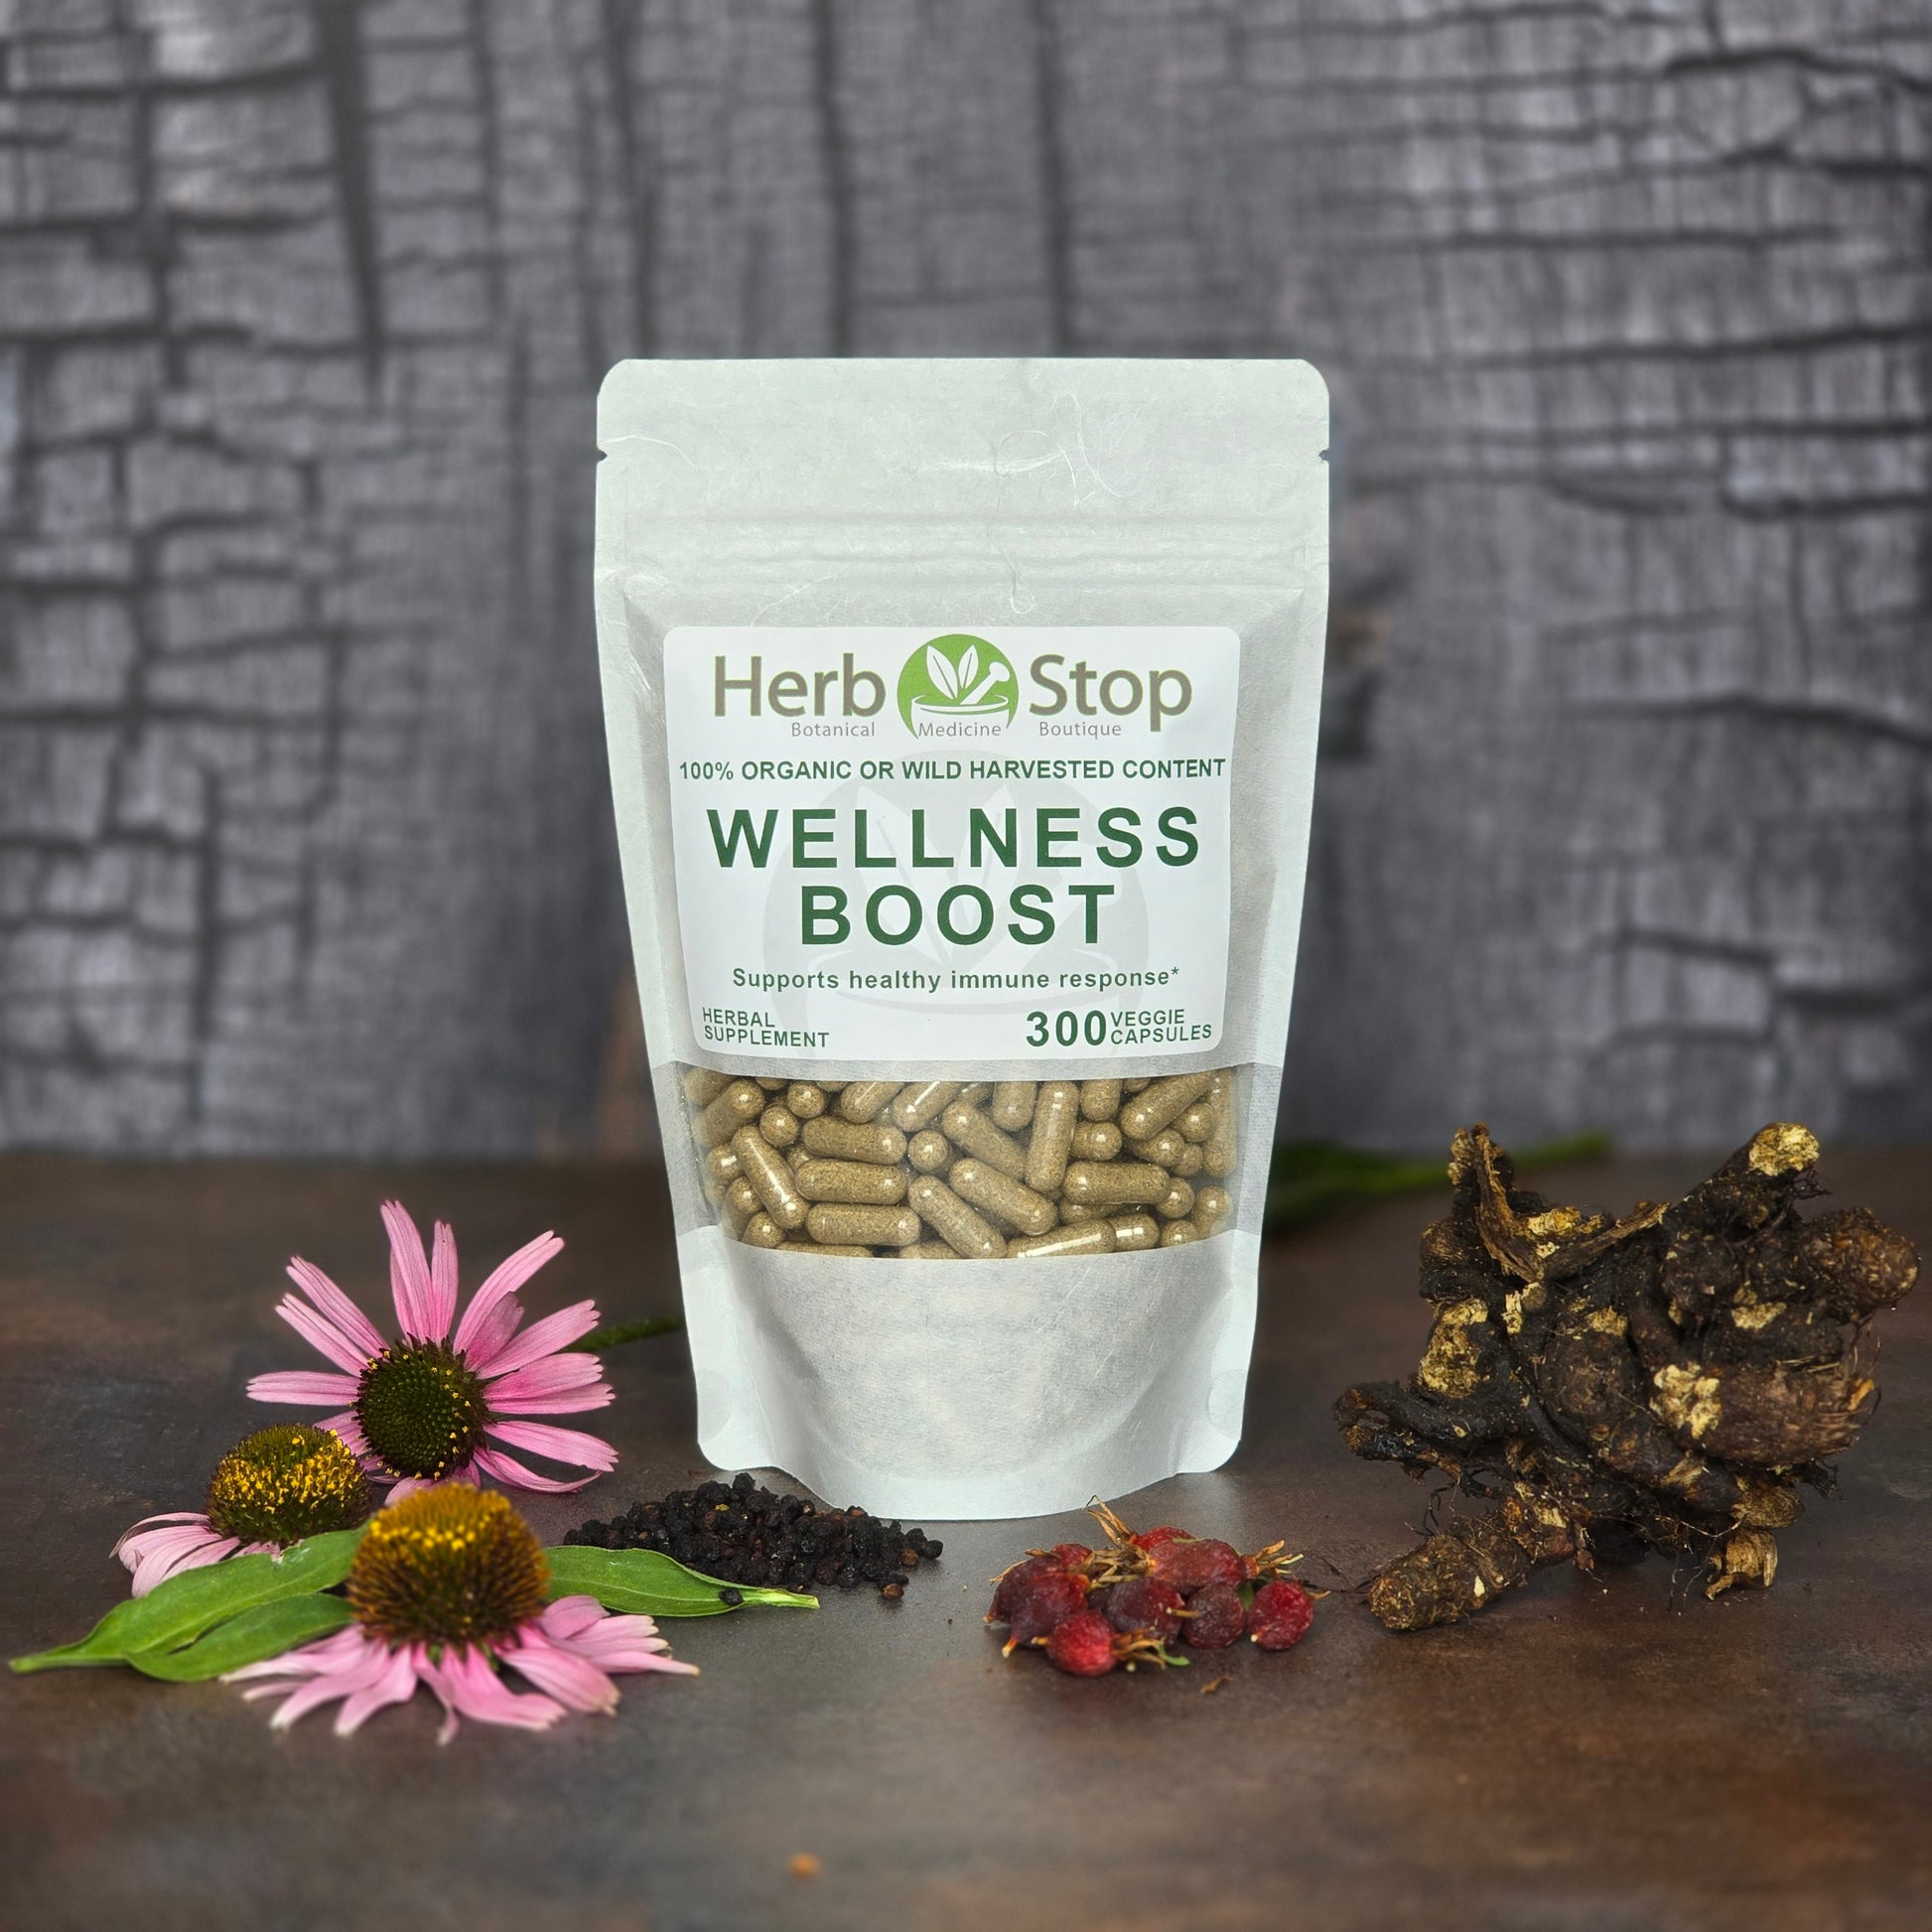 Wellness Boost Capsules surrounded by fresh herbs